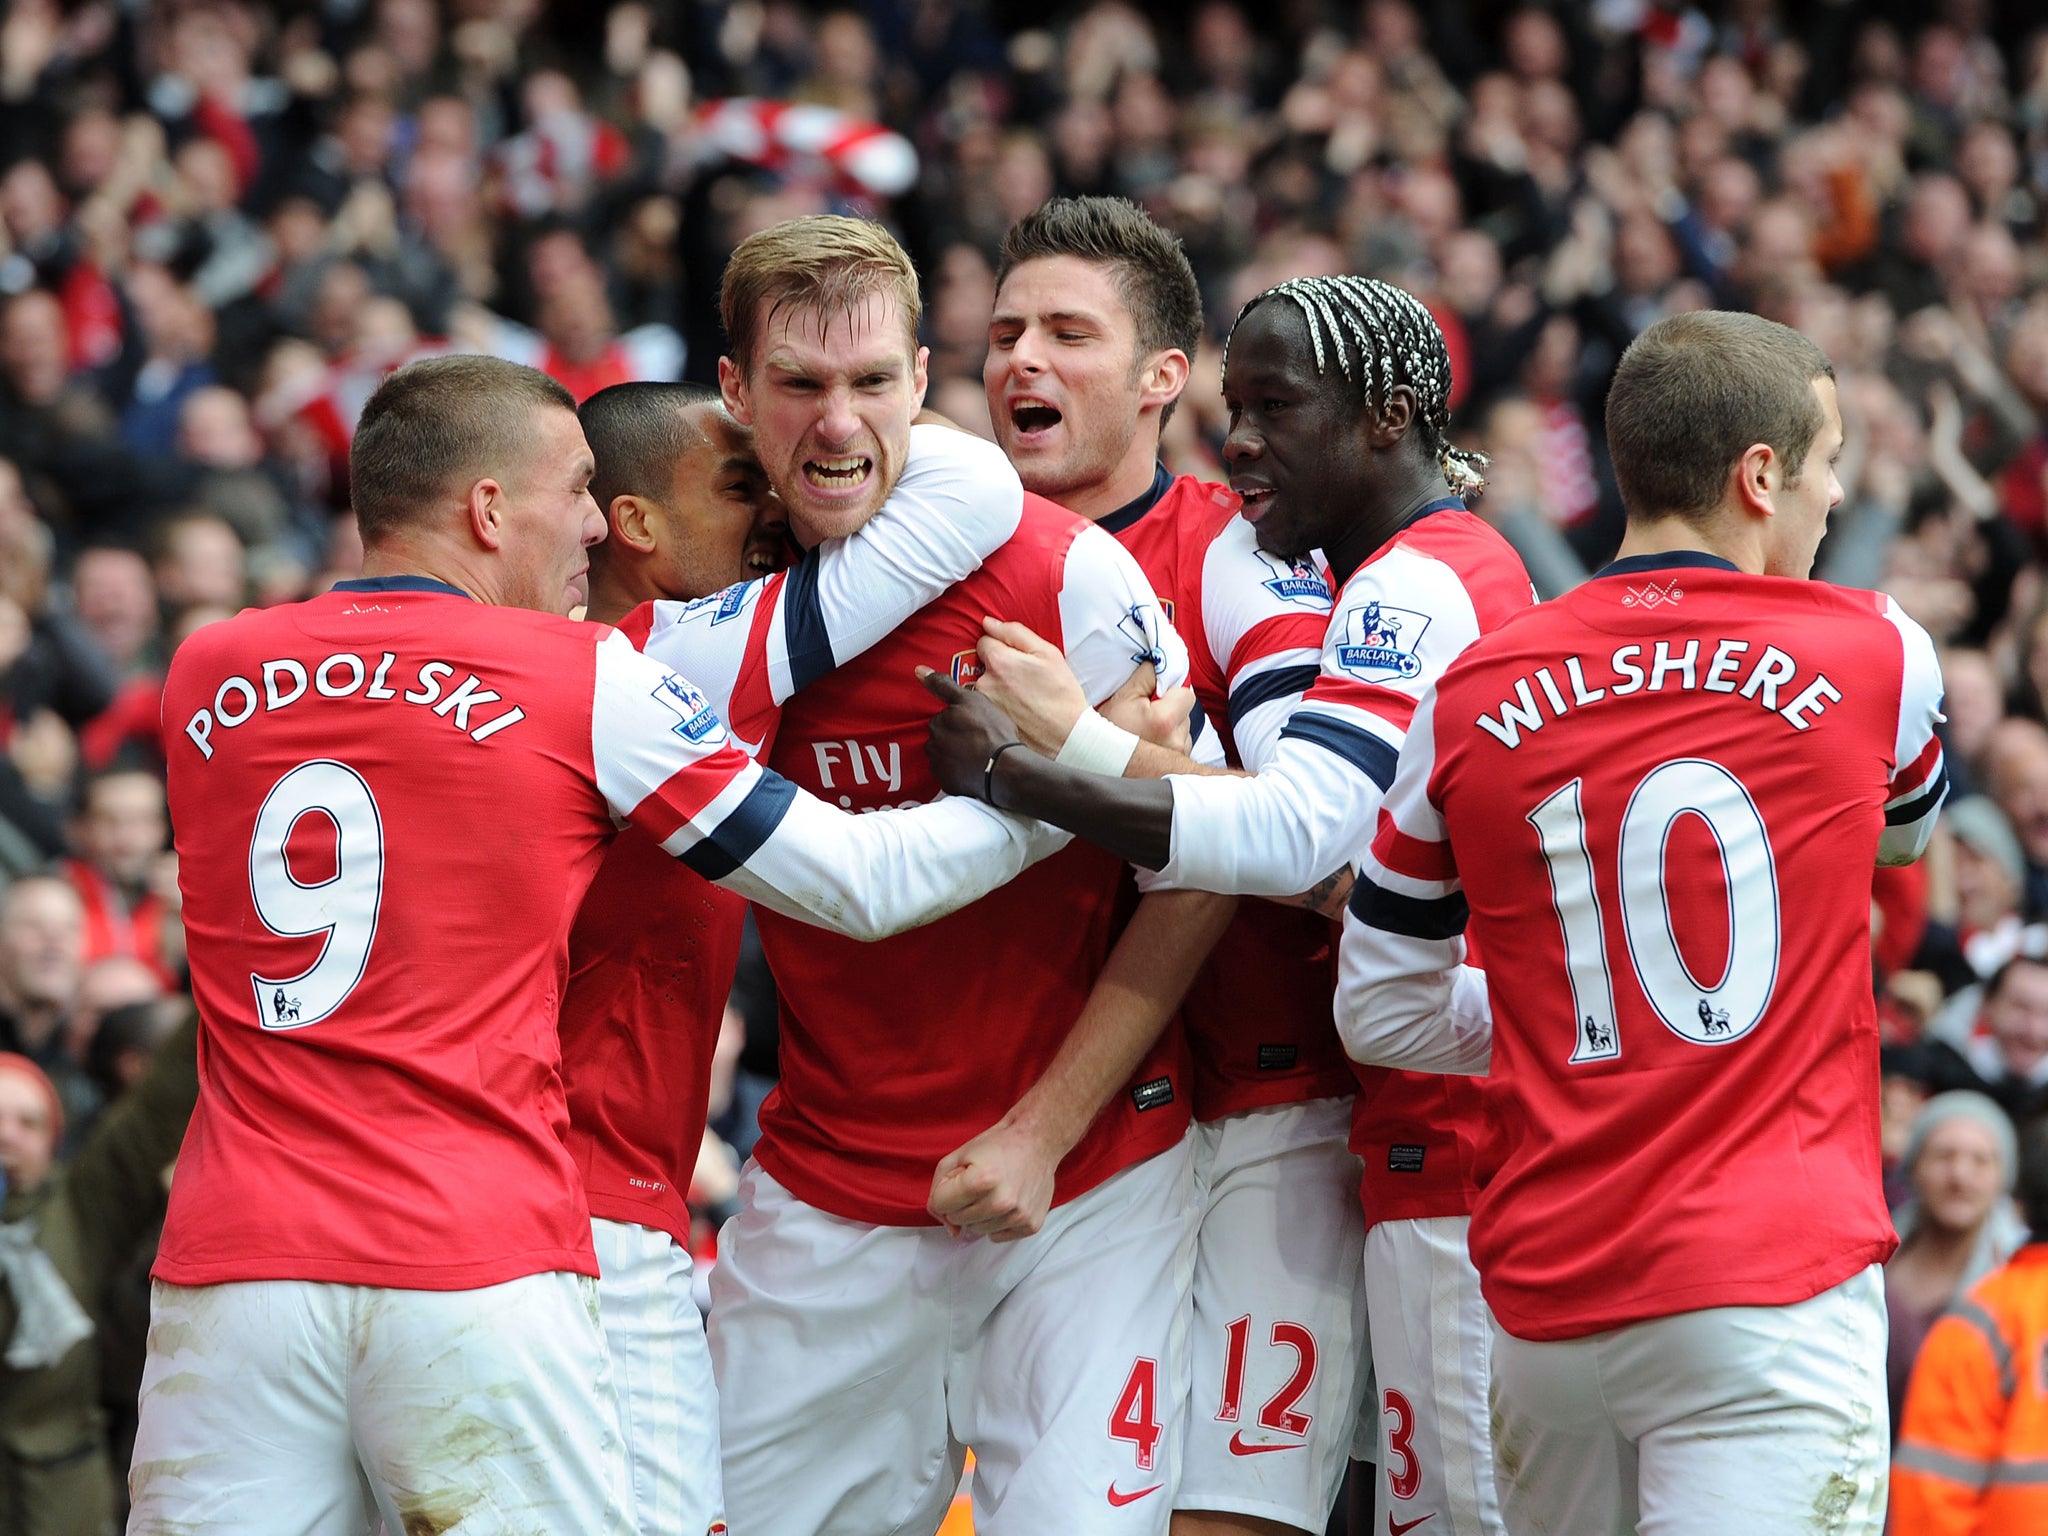 The Gunners came from a goal behind to beat 10-man Spurs at the Emirates